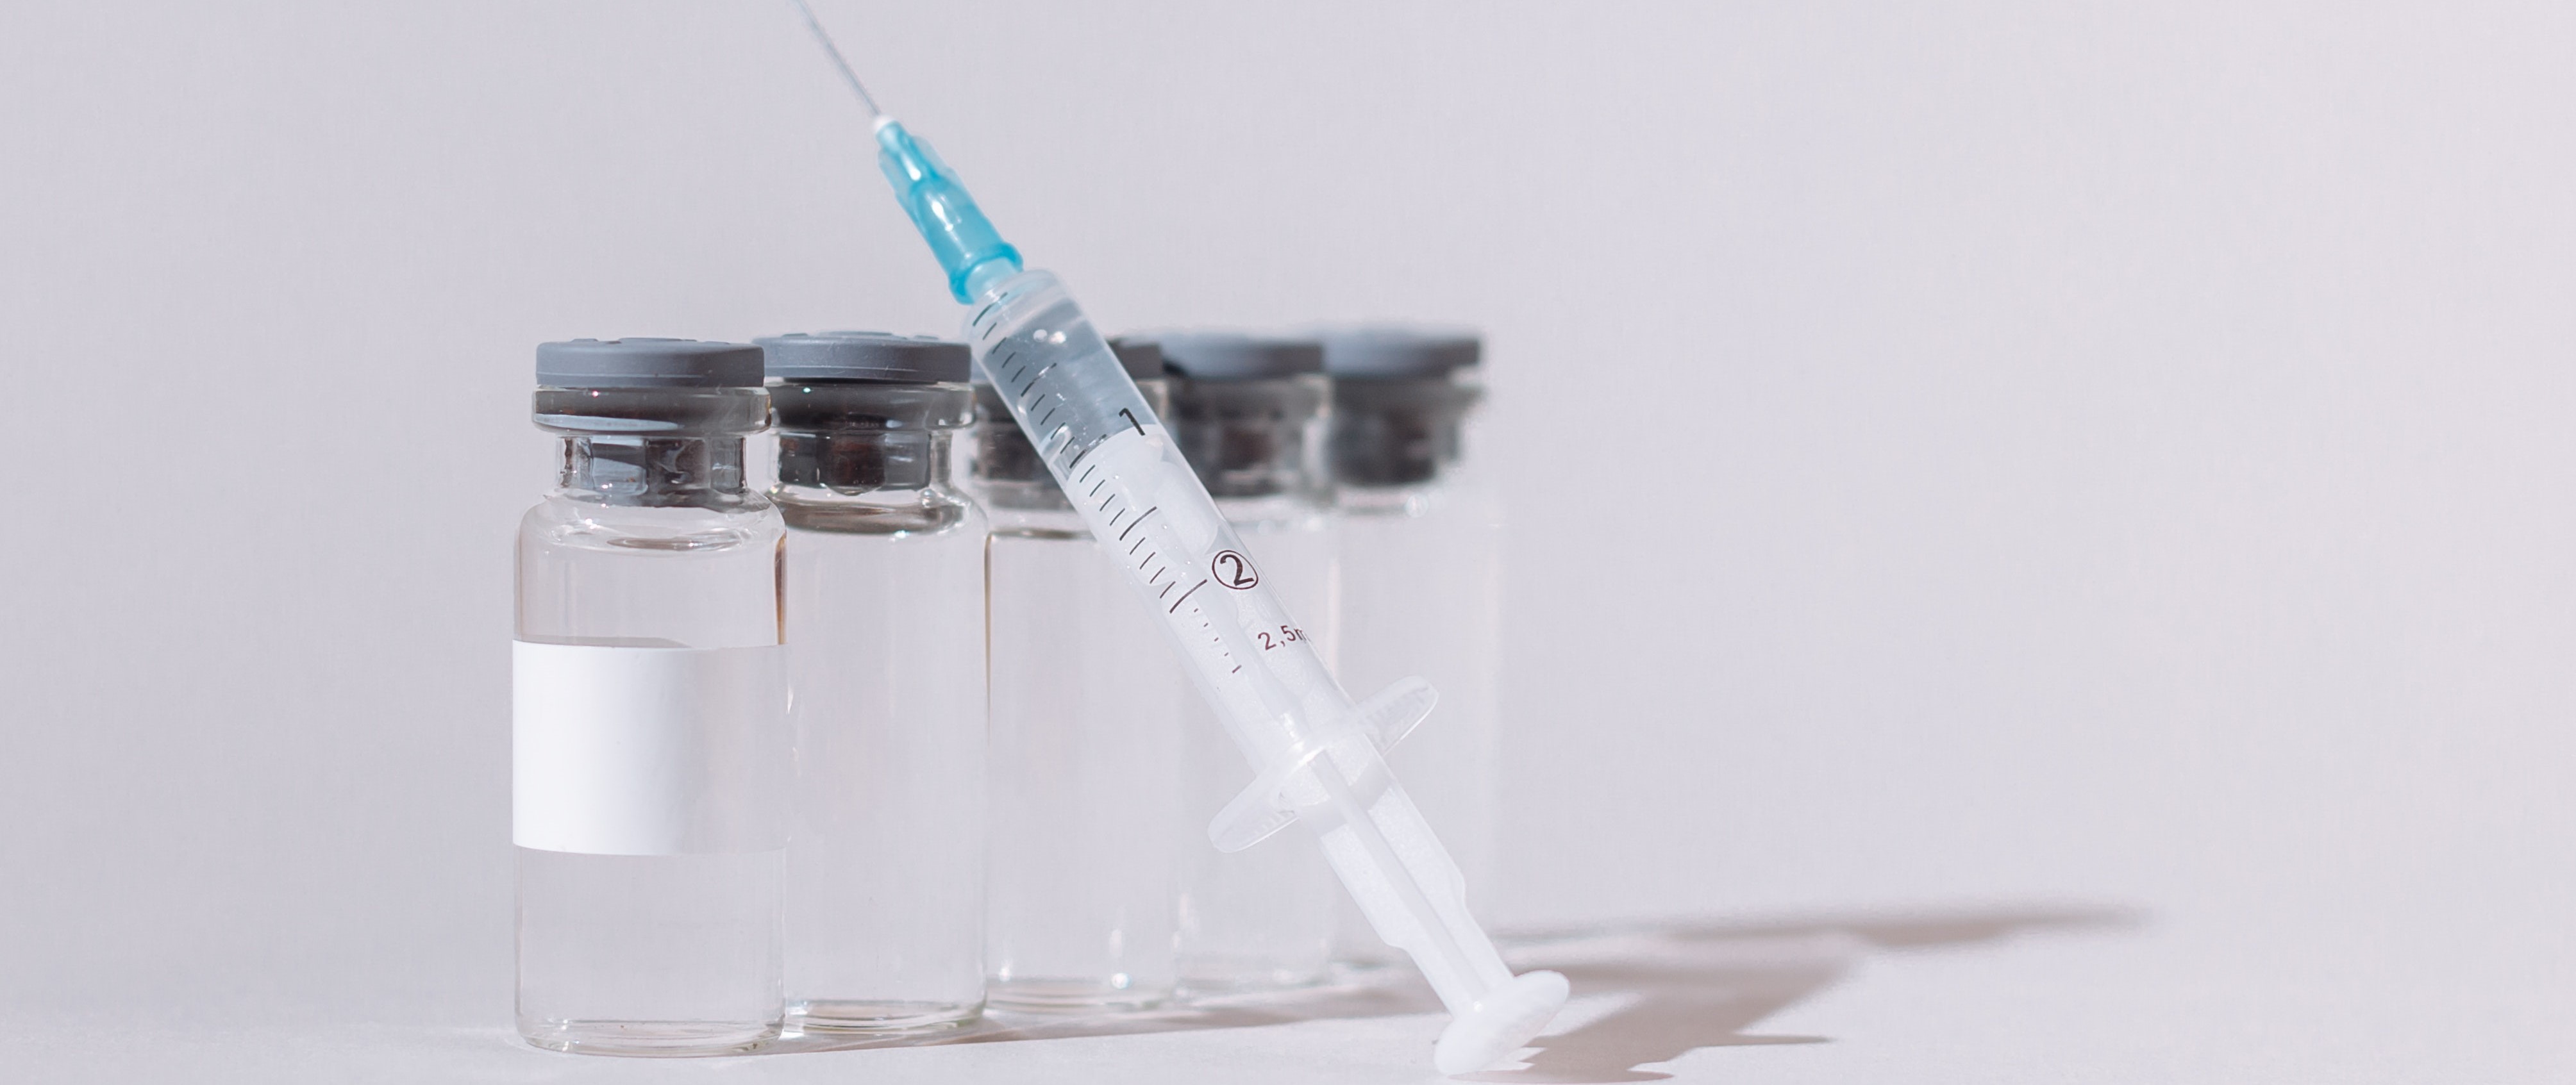 The Many Uses and Benefits of Intra-Articular Injections